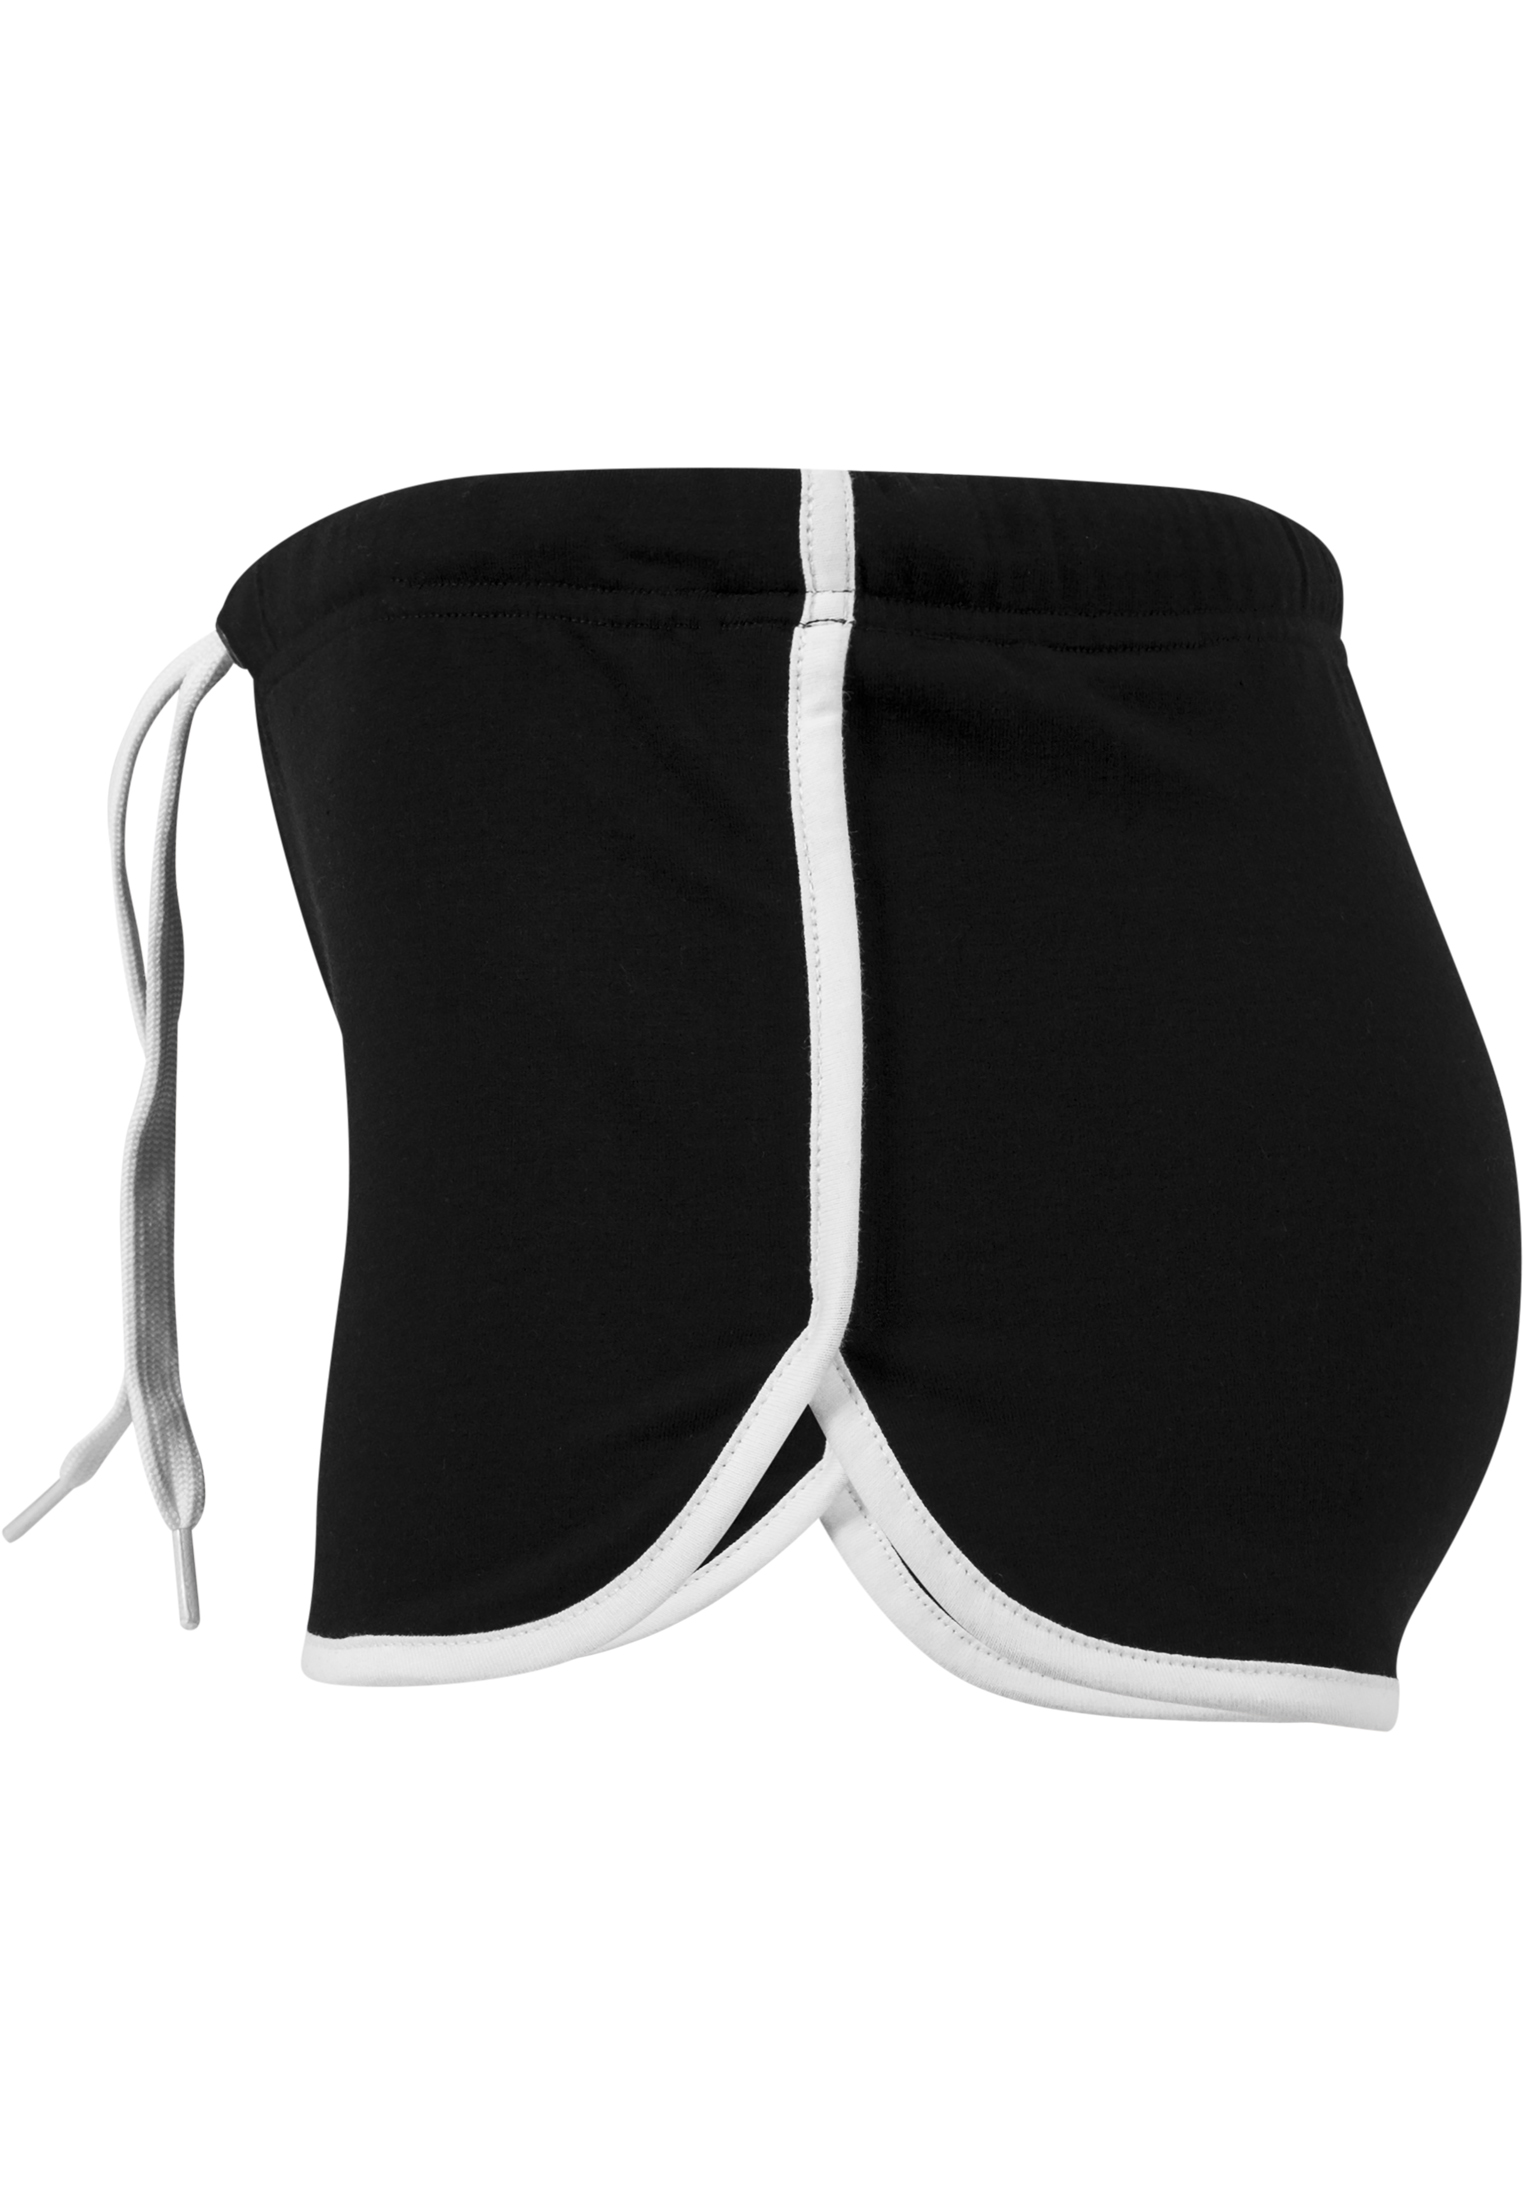 Kurze Hosen Ladies French Terry Hotpants in Farbe blk/wht